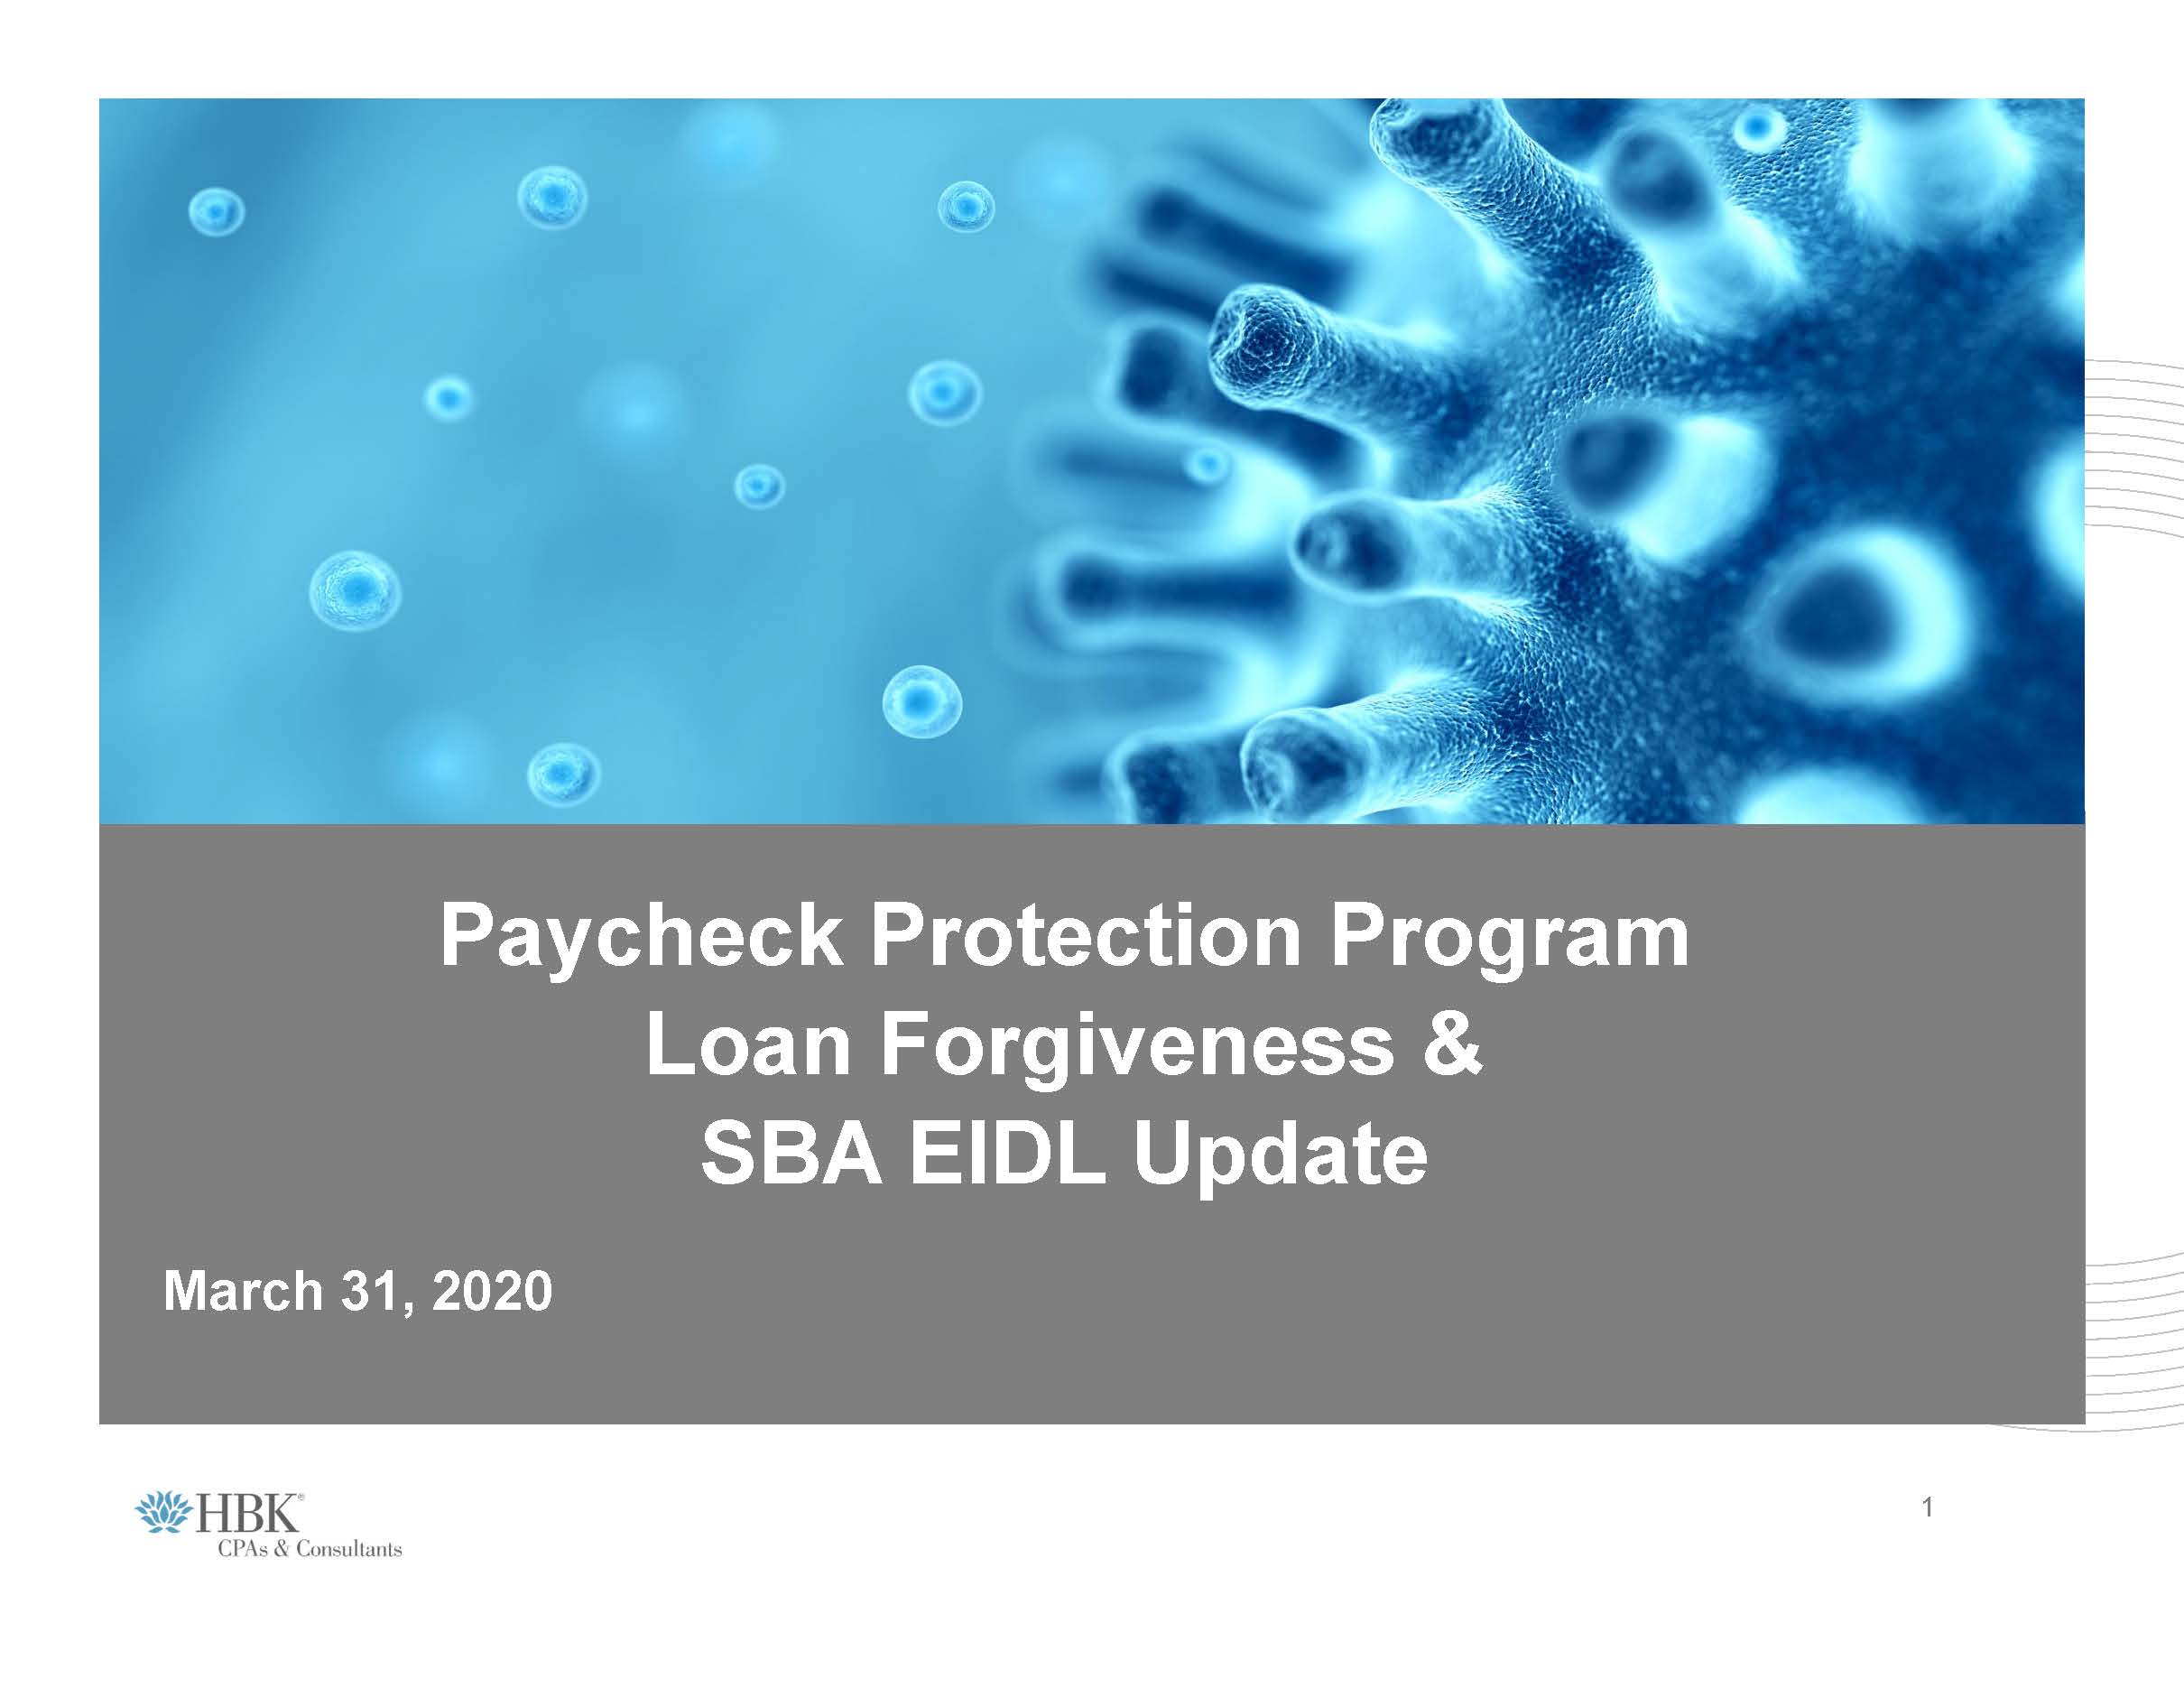 Watch: Paycheck Protection Program, Loan Forgiveness, and SBA EIDL Changes: What You Need to Know